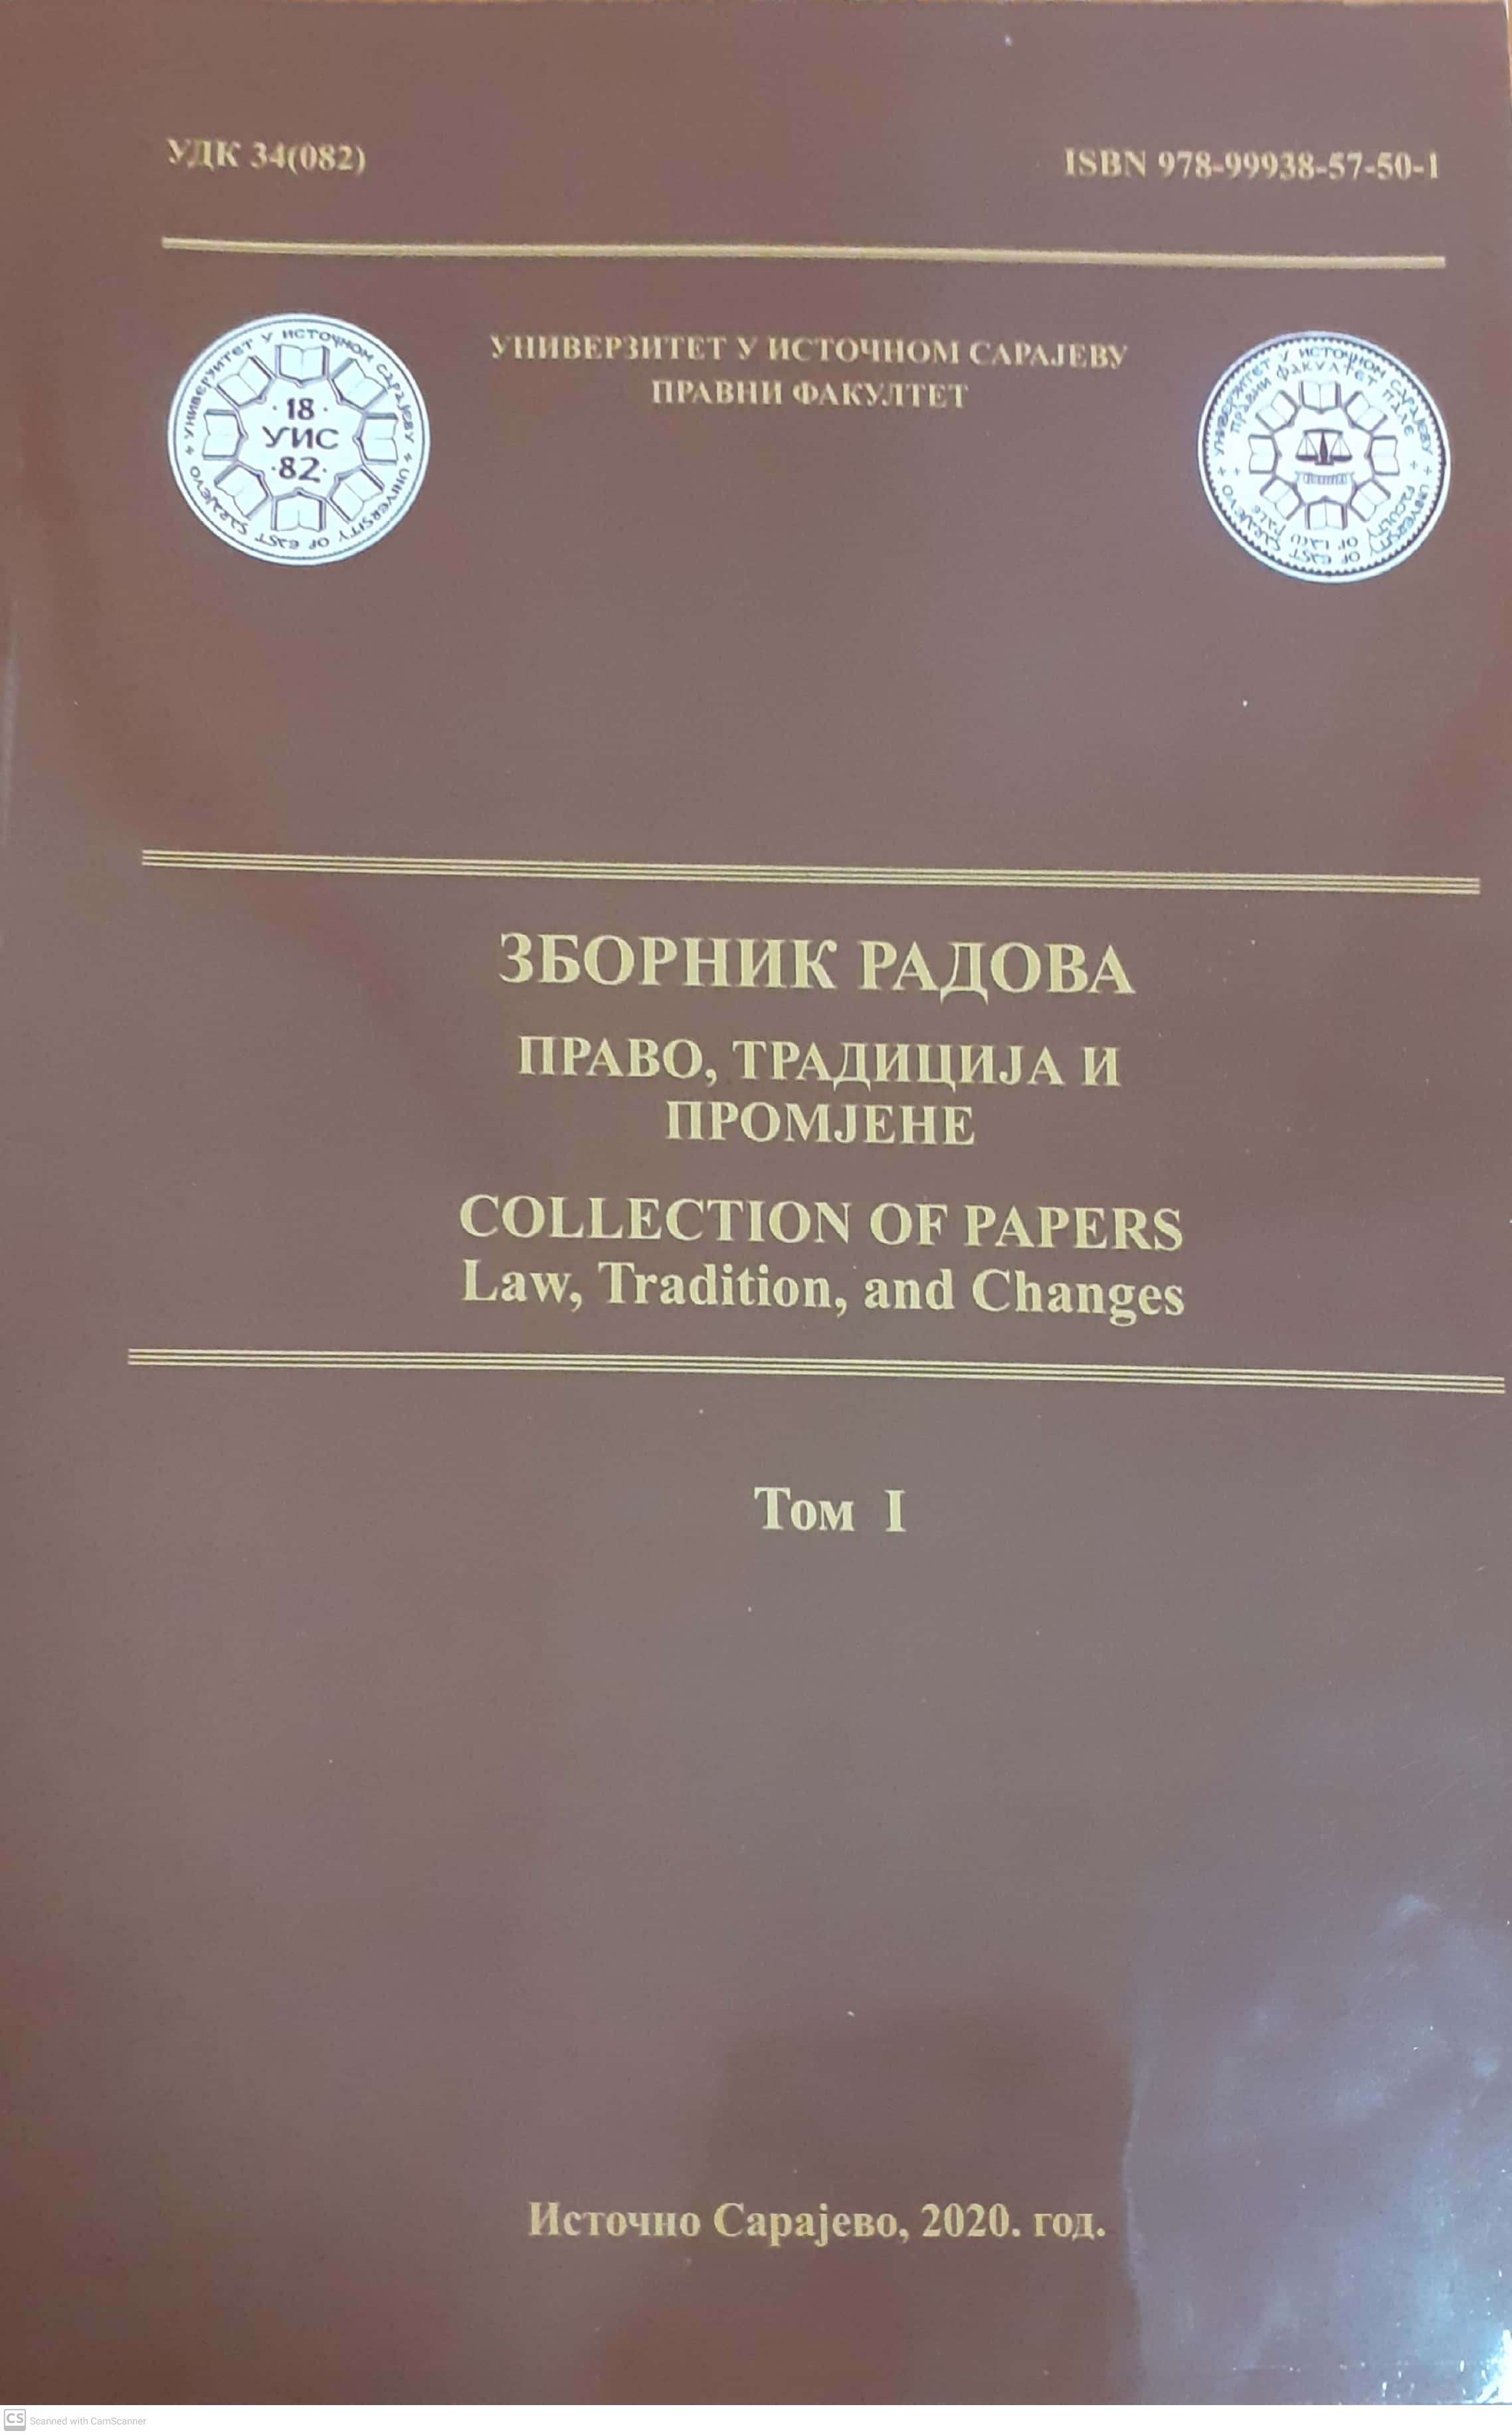 Collection of papers "Law, Tradition and Changes" Vol I - A scientific meeting (Belgrade, October 26, 2019) Cover Image